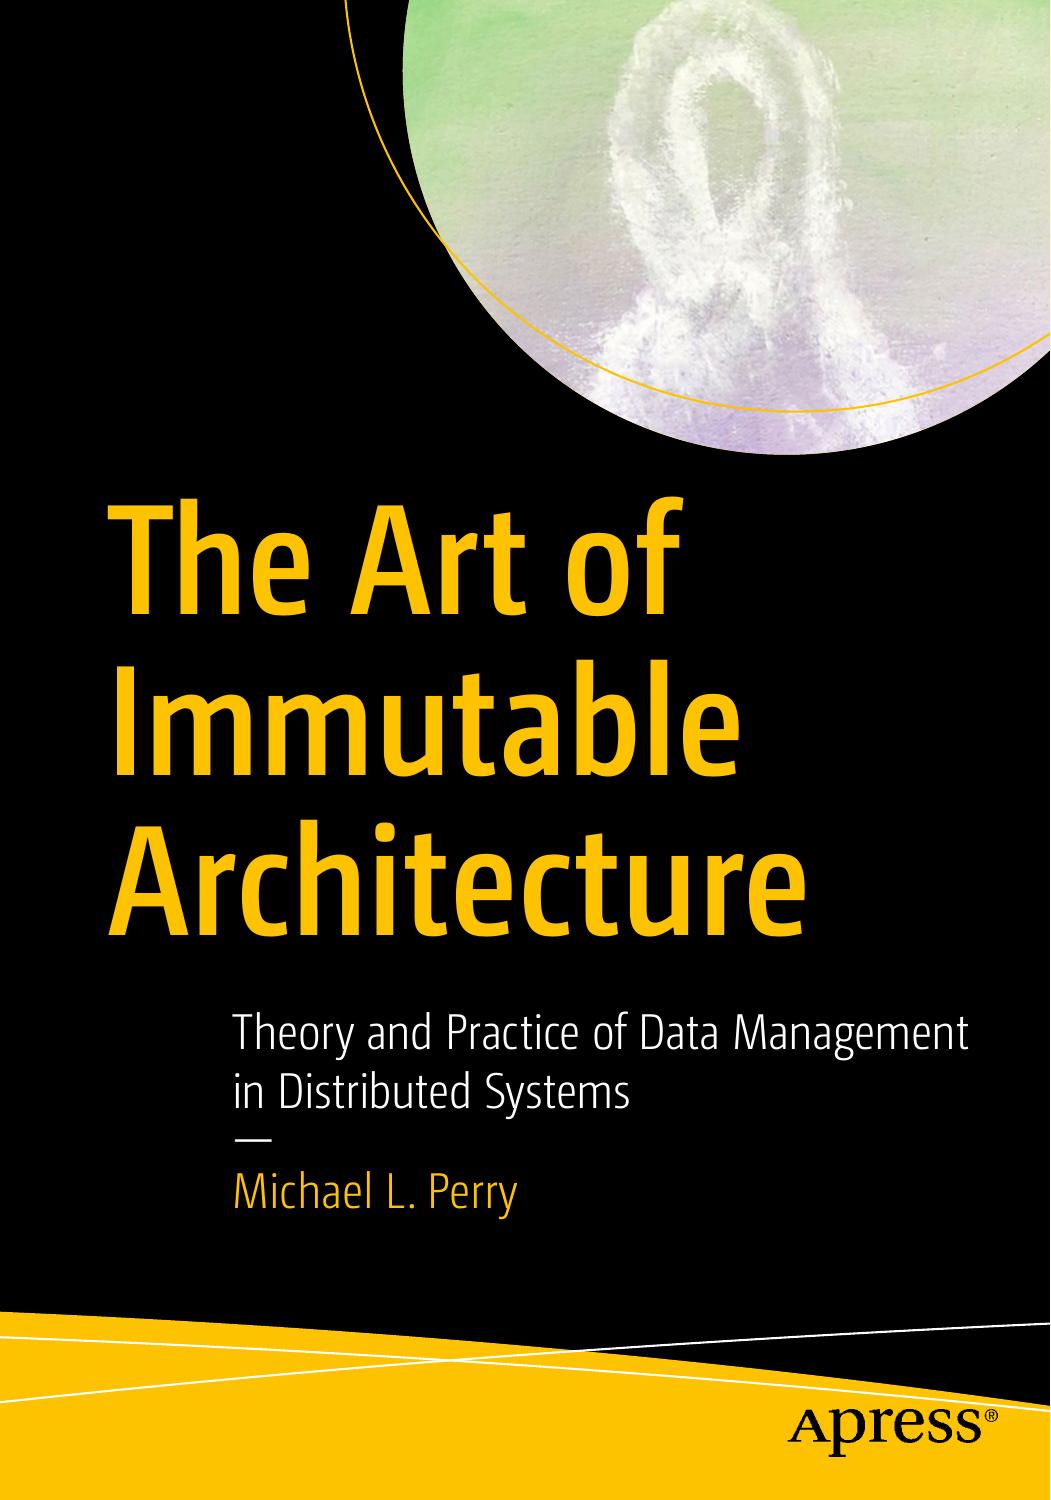 The Art of Immutable Architecture Theory and Practice of Data Management in Distributed Systems, 2020